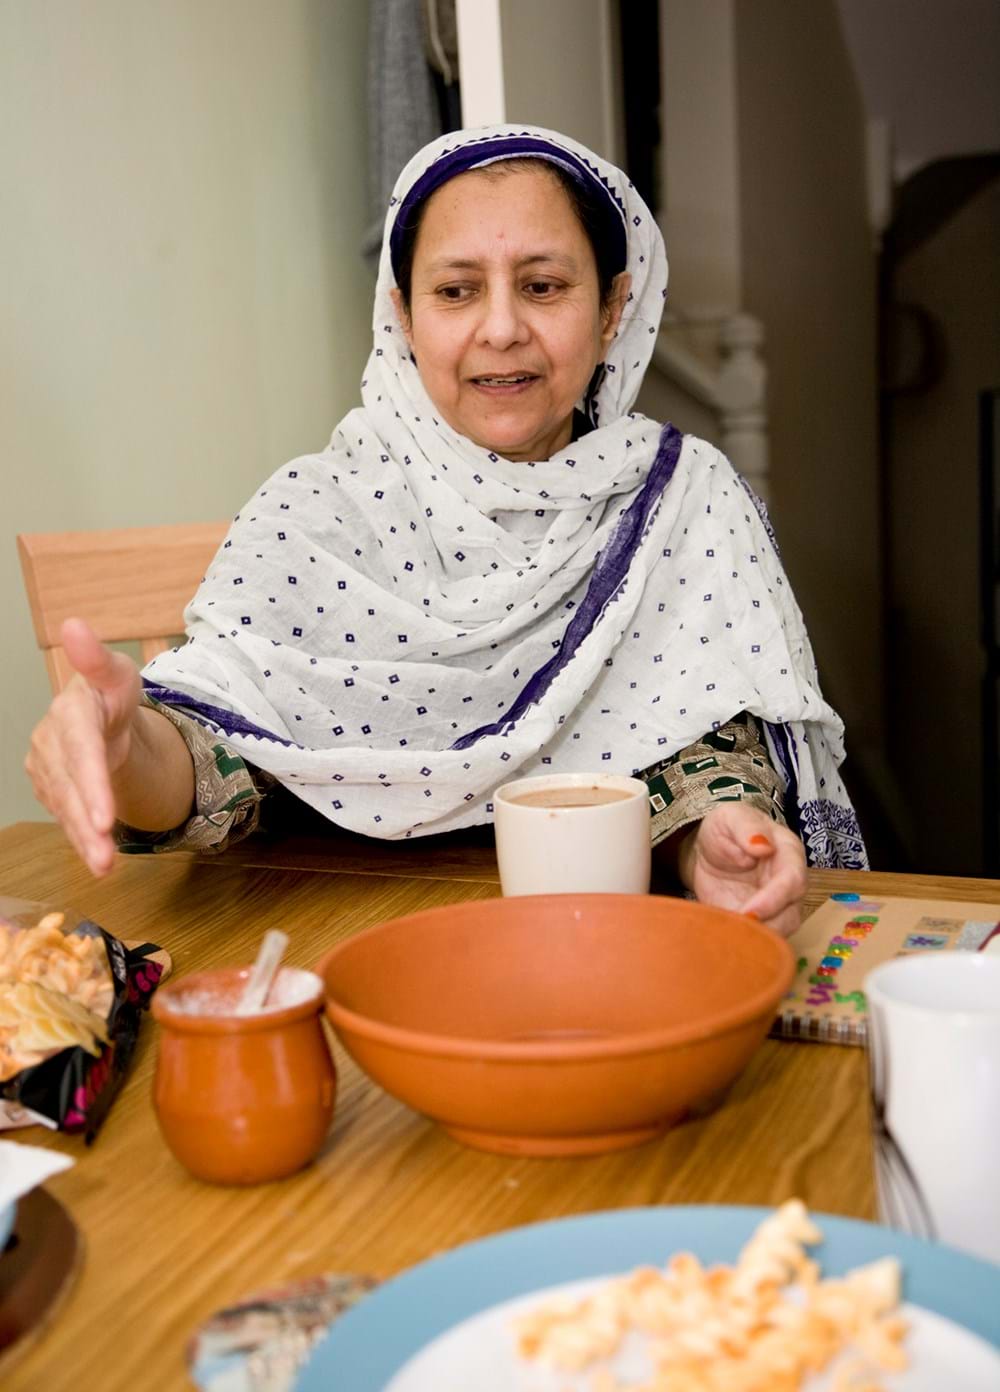 A person wearing a headscarf sitting at a table holding a cup of tea and gesturing with one arm